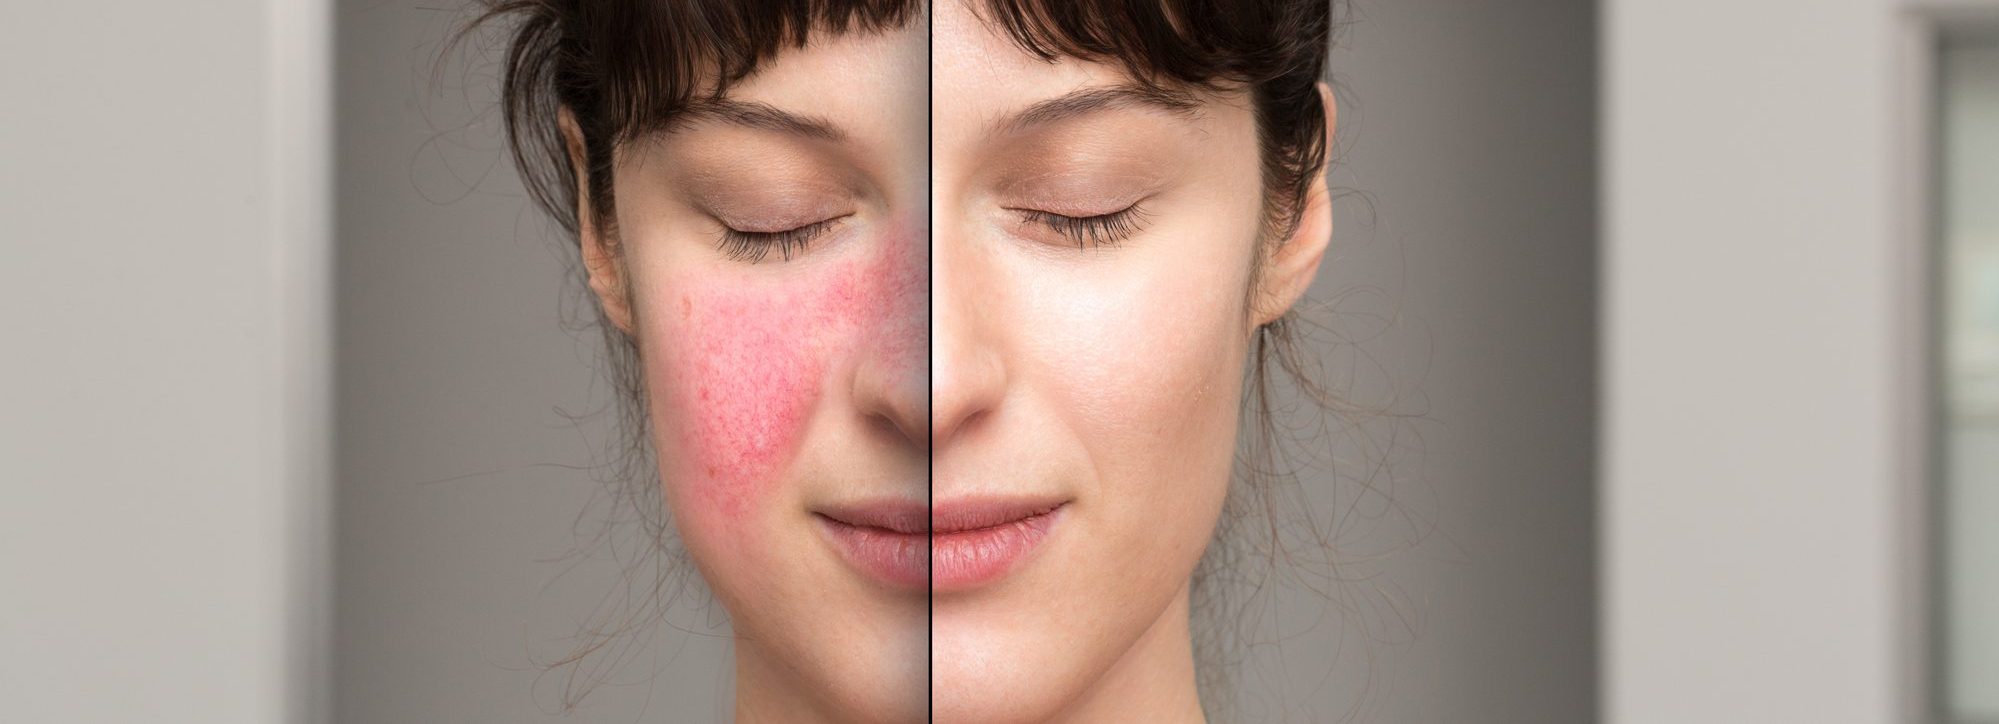 rosacea: before and after the cosmetic treatment of skin disorders